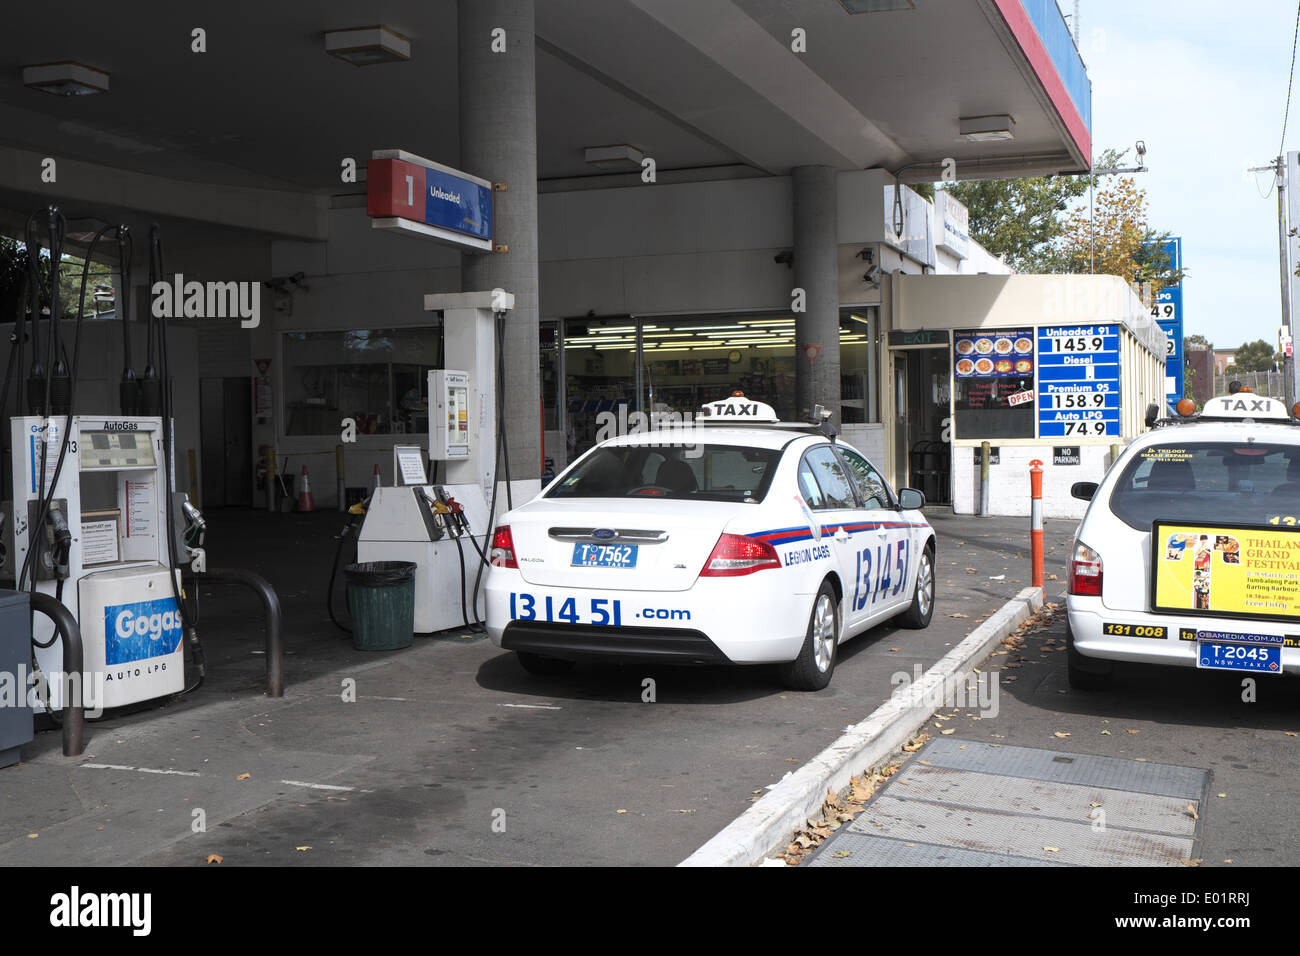 sydney taxi filling up with fuel LPG at a fuel gas station in chippendale,sydney Stock Photo